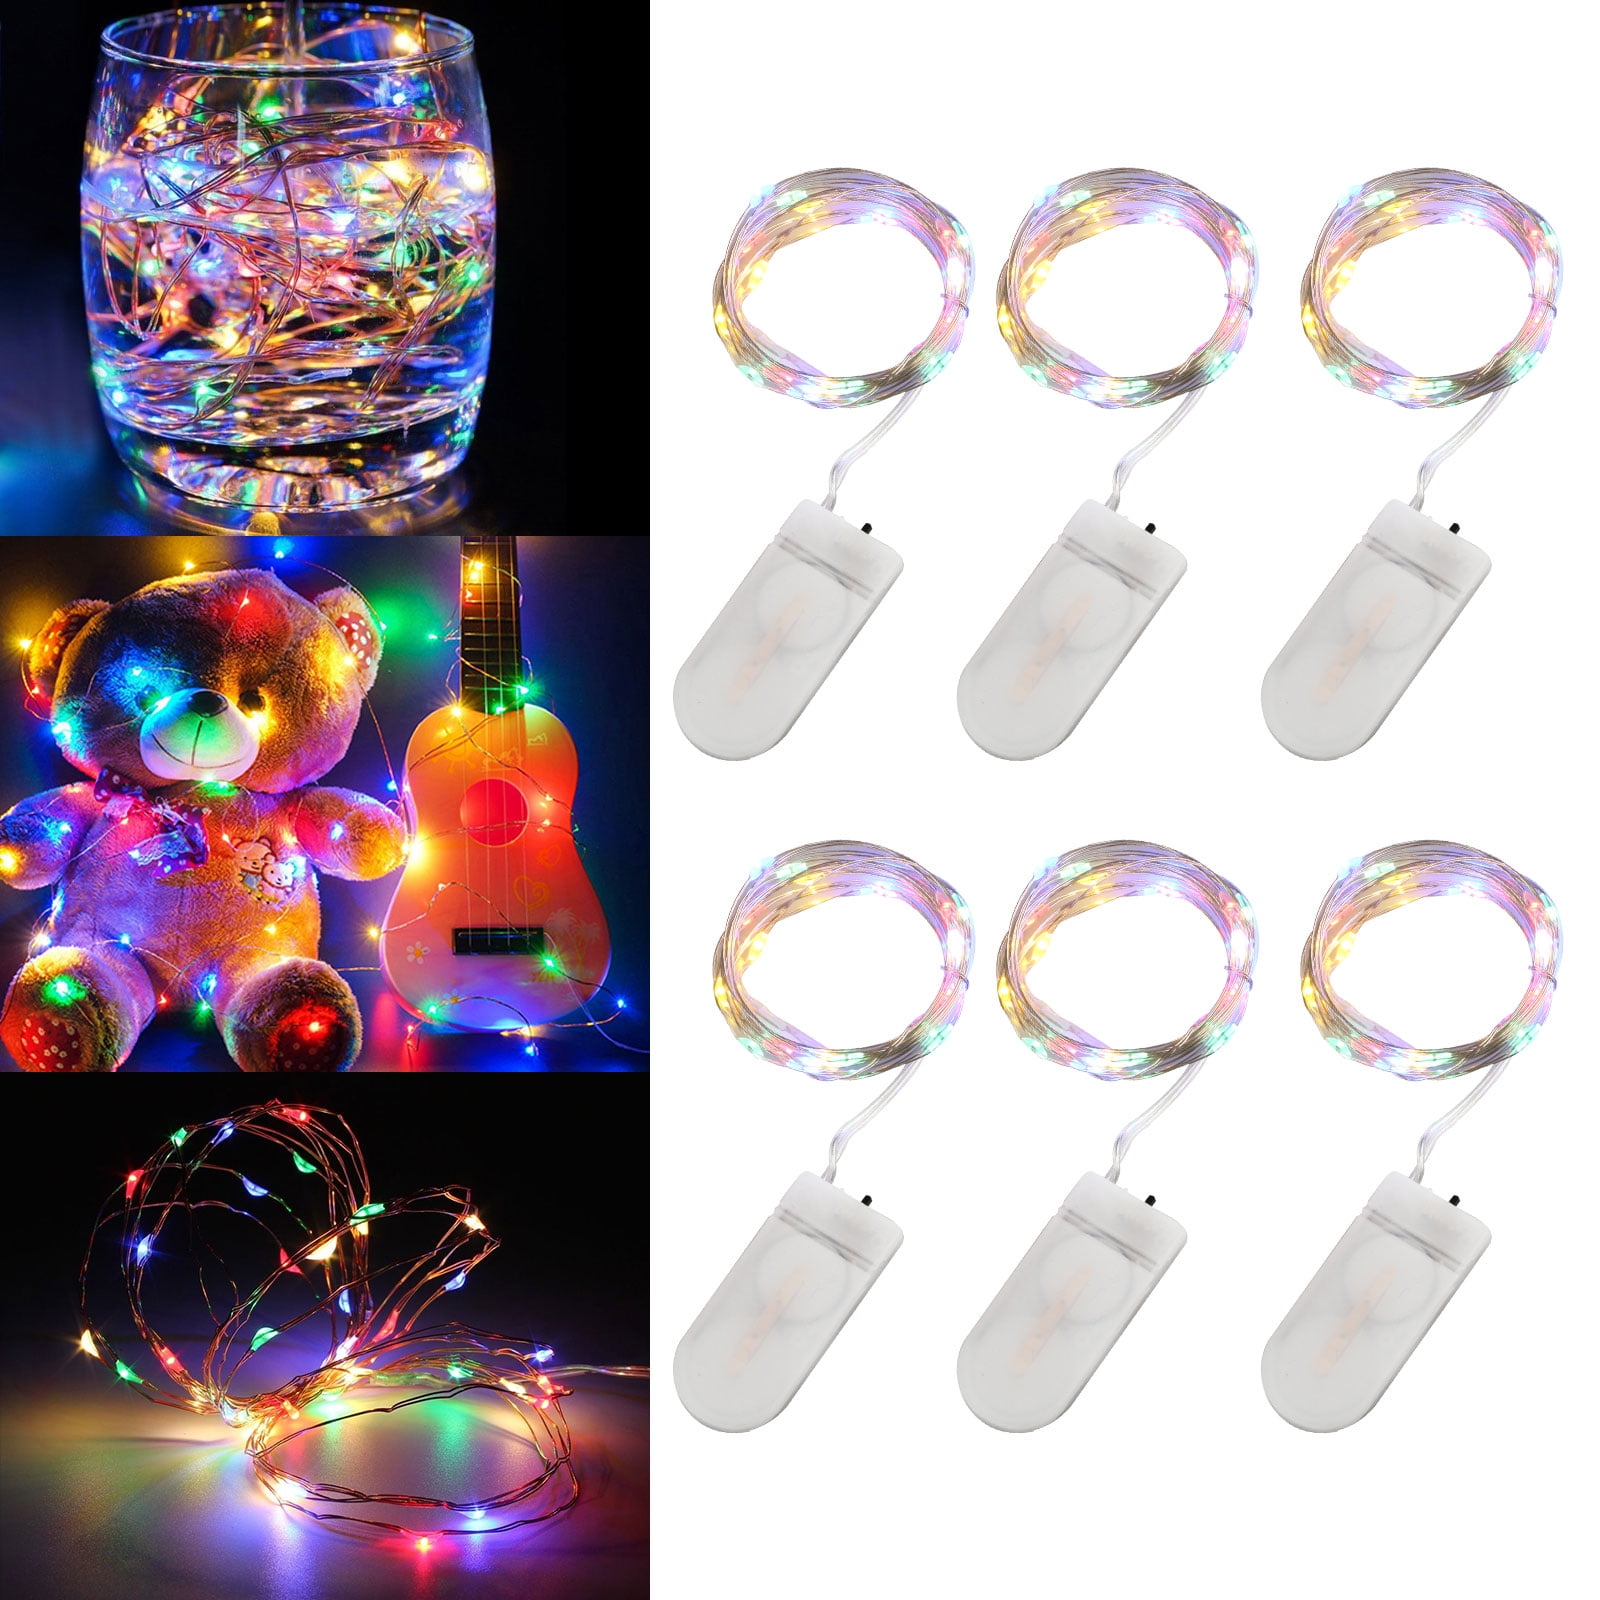 10 Pack Fairy Lights 7Ft 20 Micro LED Twinkle Lights Battery Operated String Lights on Silver Wire Firefly Starry Moon Lights for DIY Wedding Bedroom Indoor Party Christmas Decoration Warm White